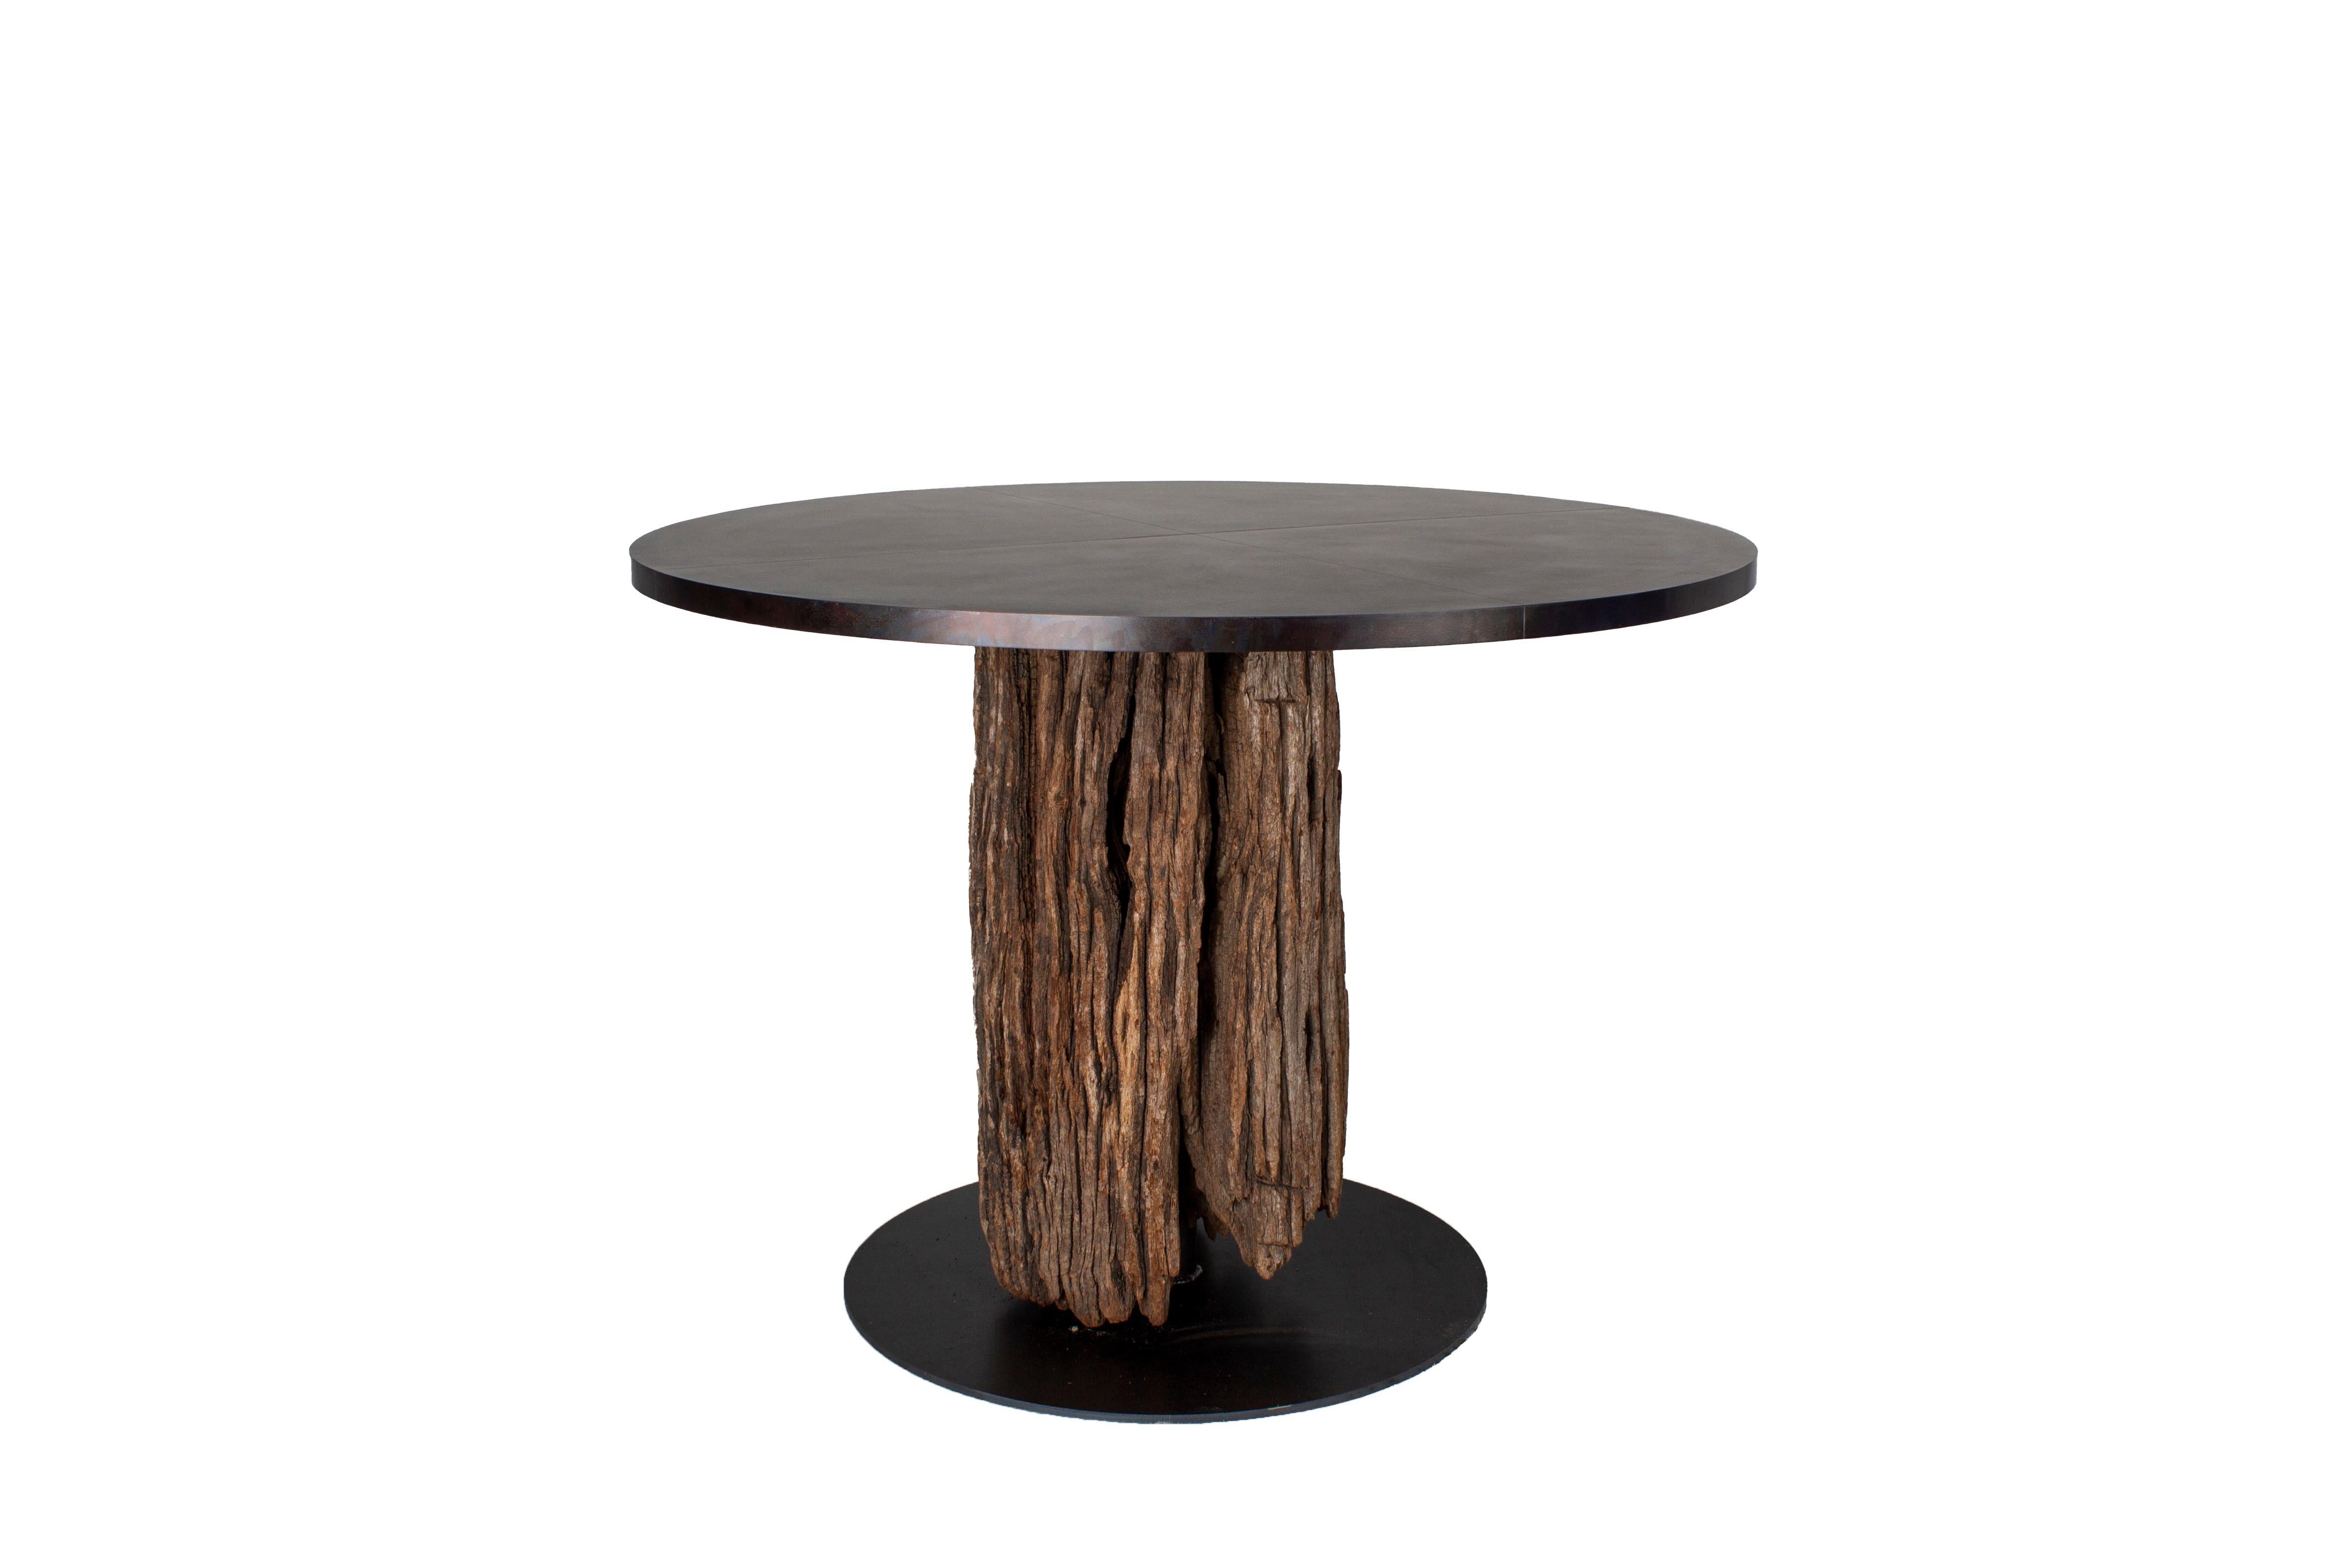 Organic form bar table in weathered South Asian iron wood on steel mount. Iron wood has been used for hundreds of years by the Dutch in Indonesia for building marine structures, docks, quays, piers.

The log I used in creating this table was chosen